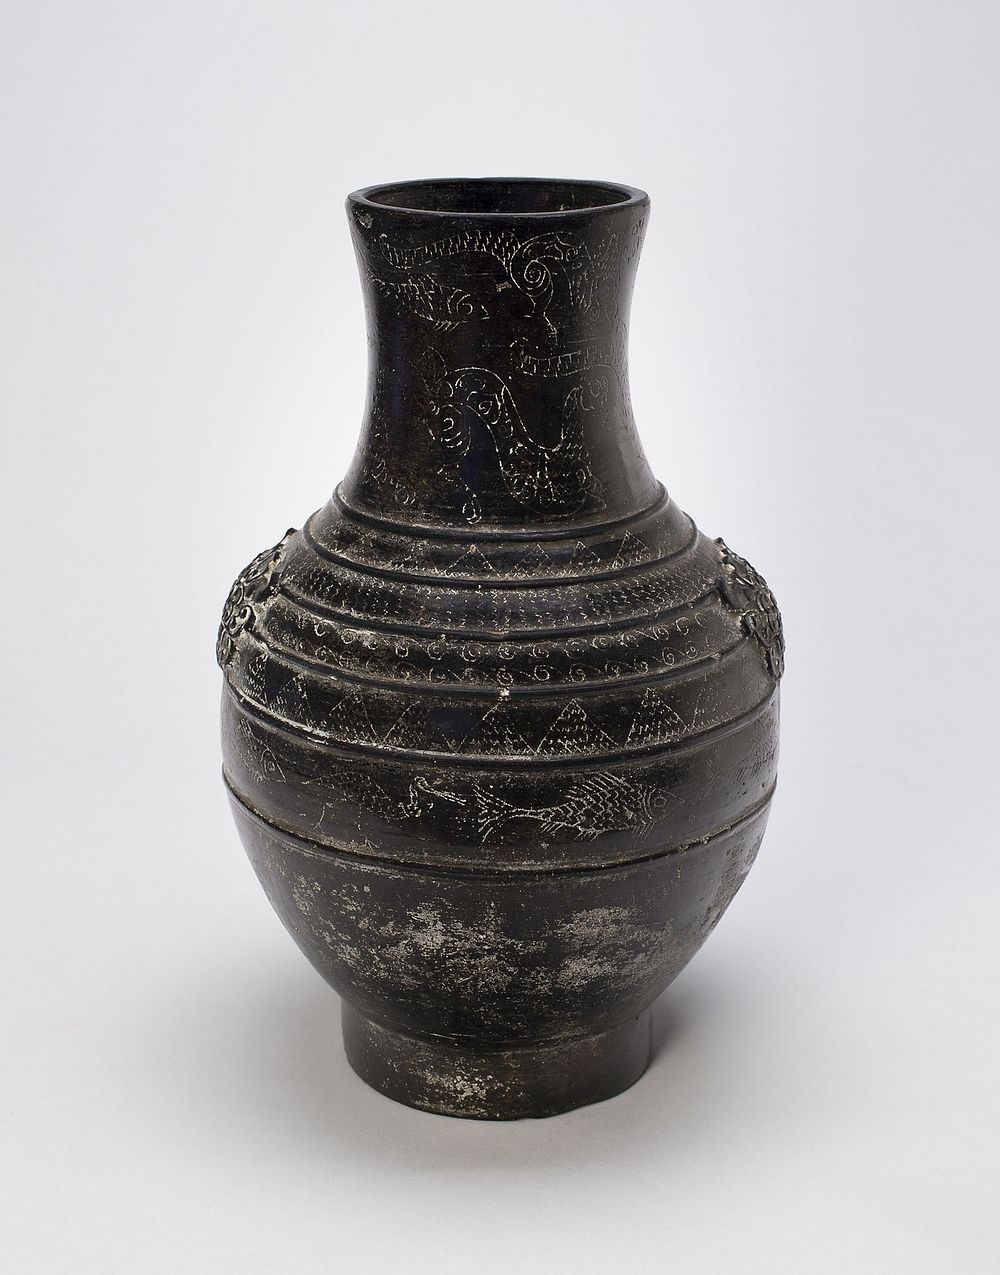 Container in the Form of an Ancient Bronze Jar (hu)